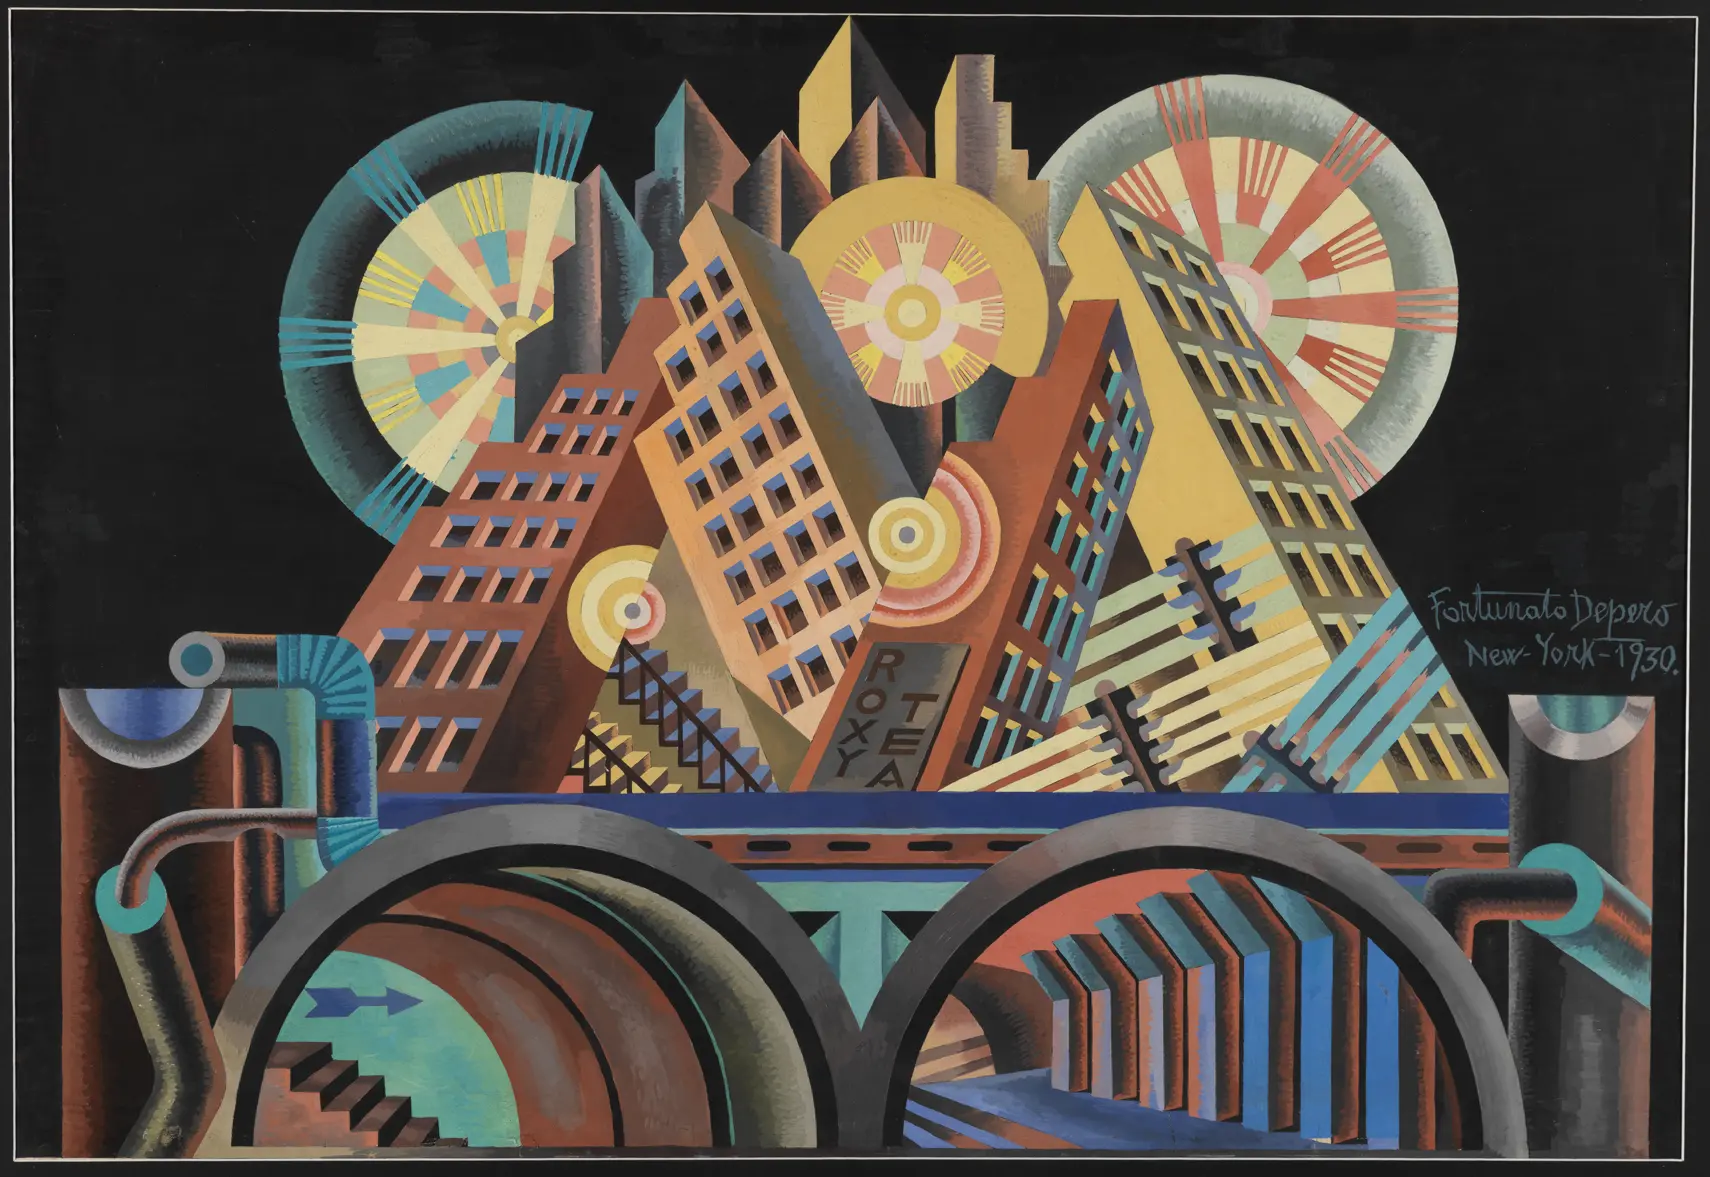 Fortunato Depero, Skyscrapers and Tunnels, 1930, Museum of Modern and Contemporary Art of Trento and Rovereto, Trento, Italy.